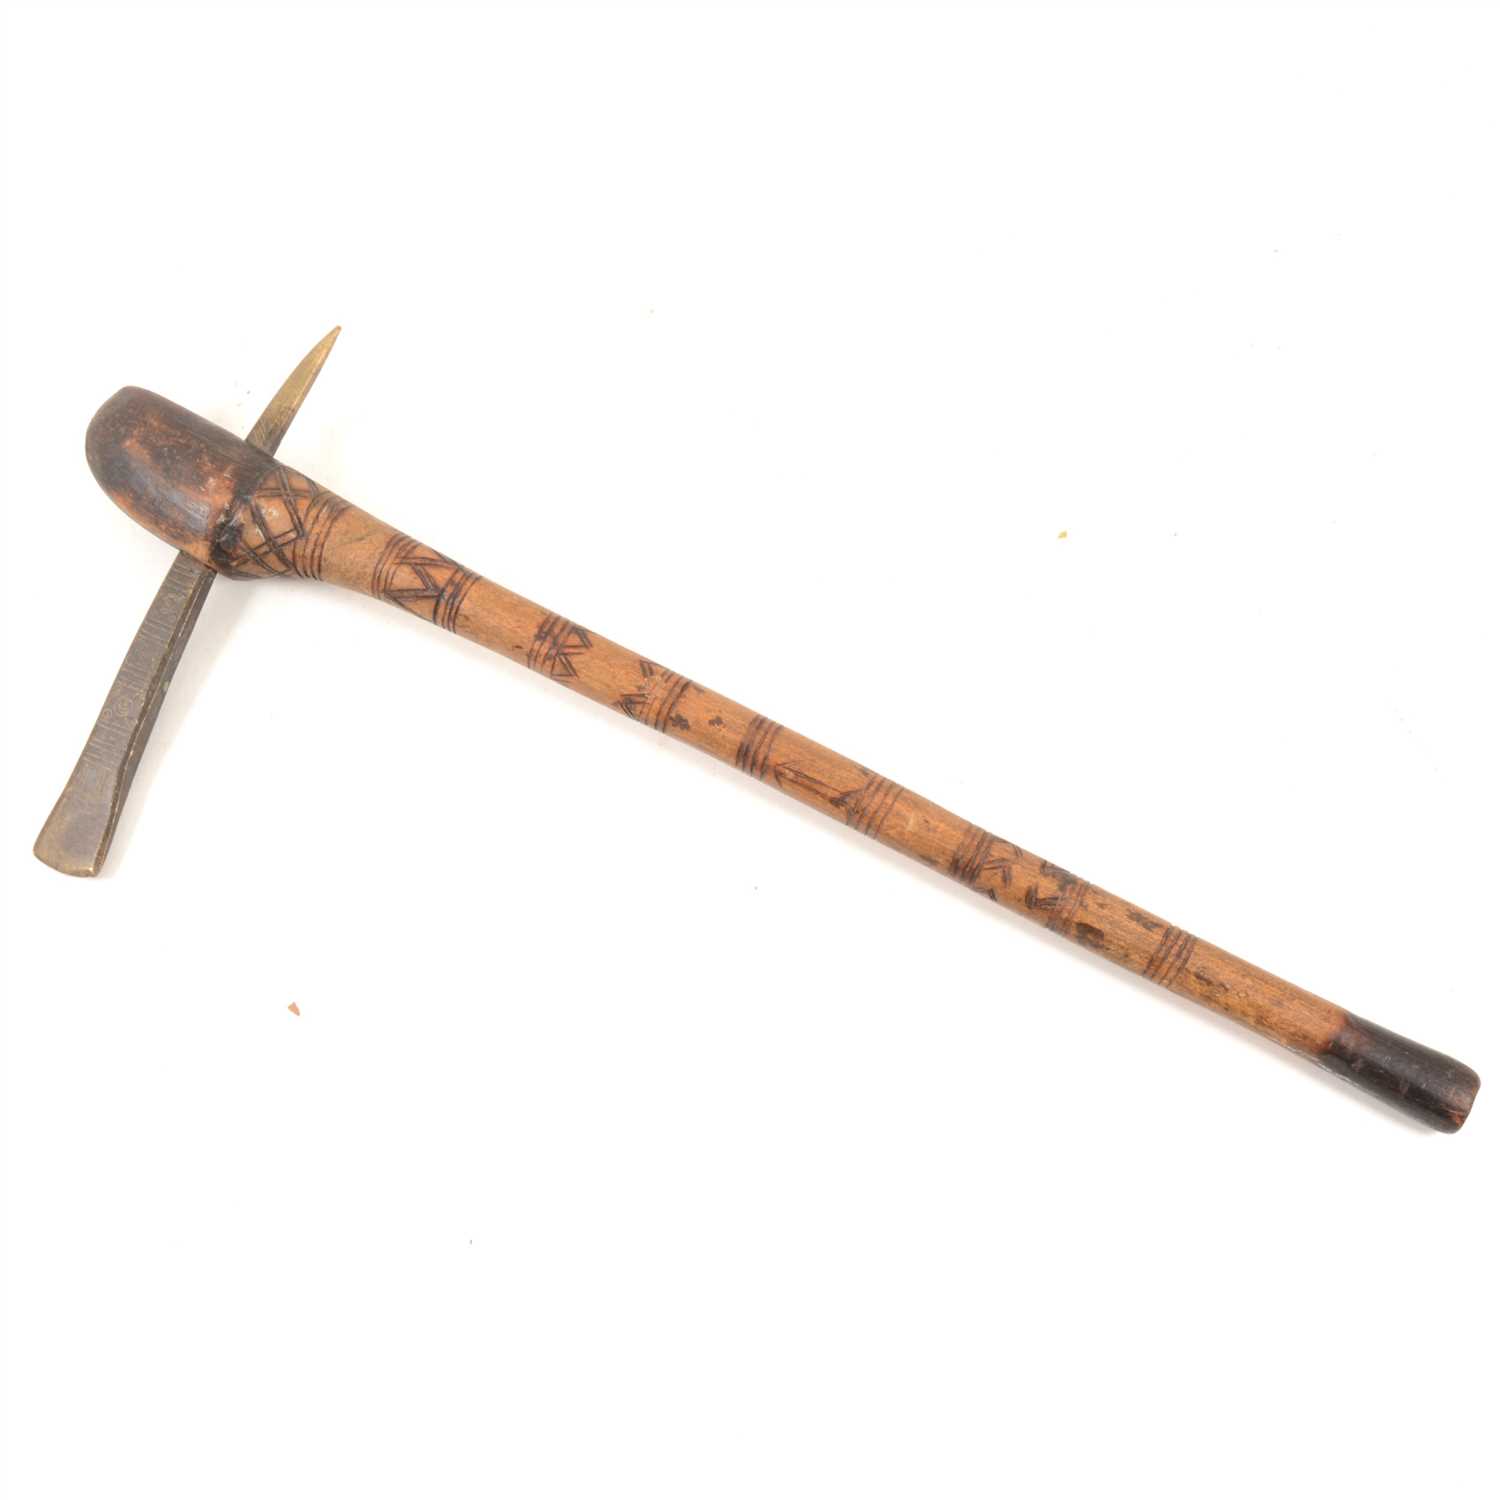 Lot 111 - A spiked tomahawk, possibly Native American